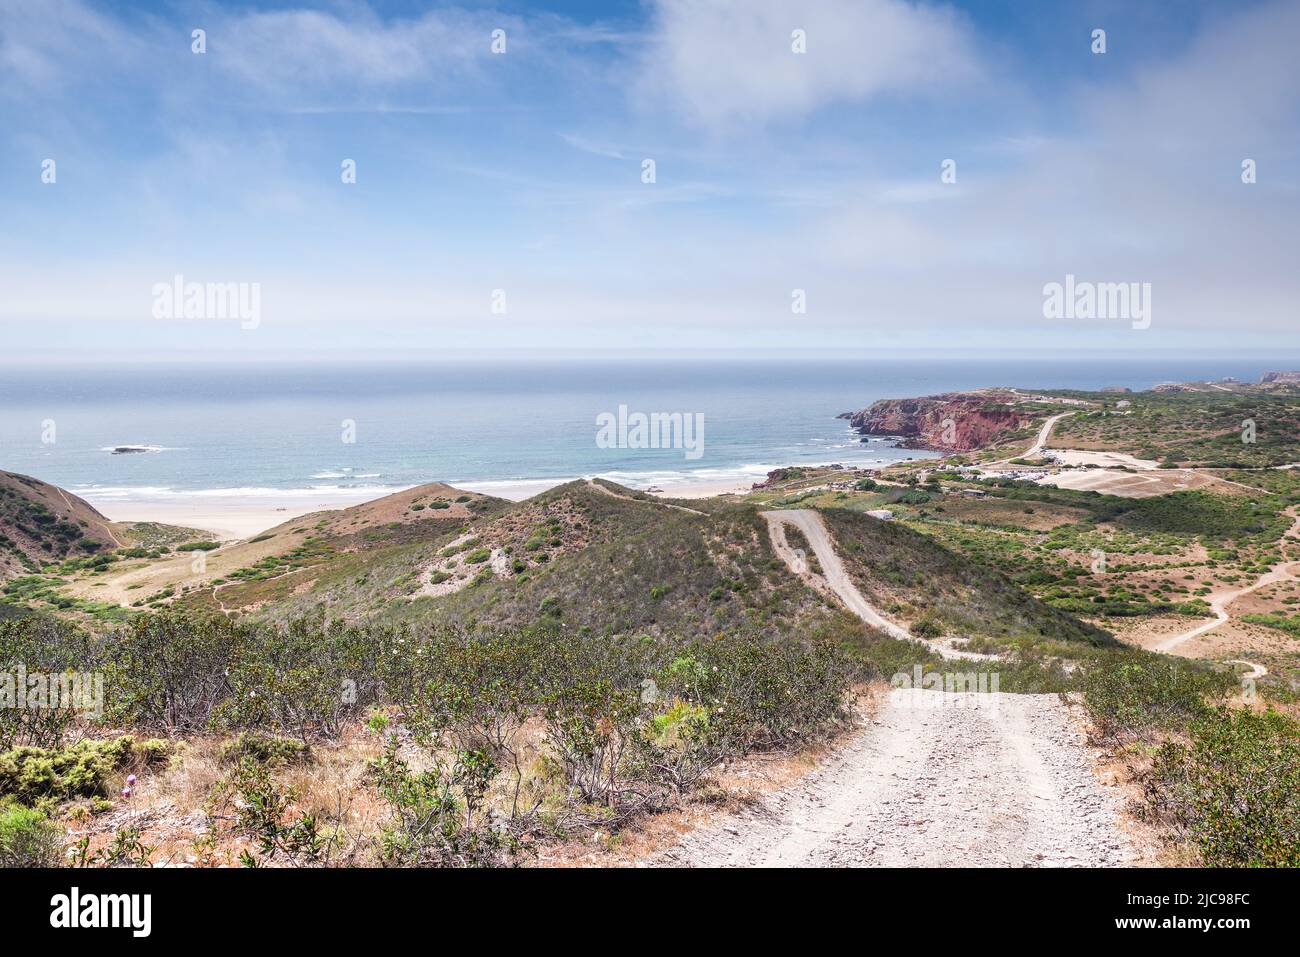 Fabulous view of Praia do Amado and the south west coast of Algarve from the top of a rural dirt track (Algarve, Portugal) Stock Photo